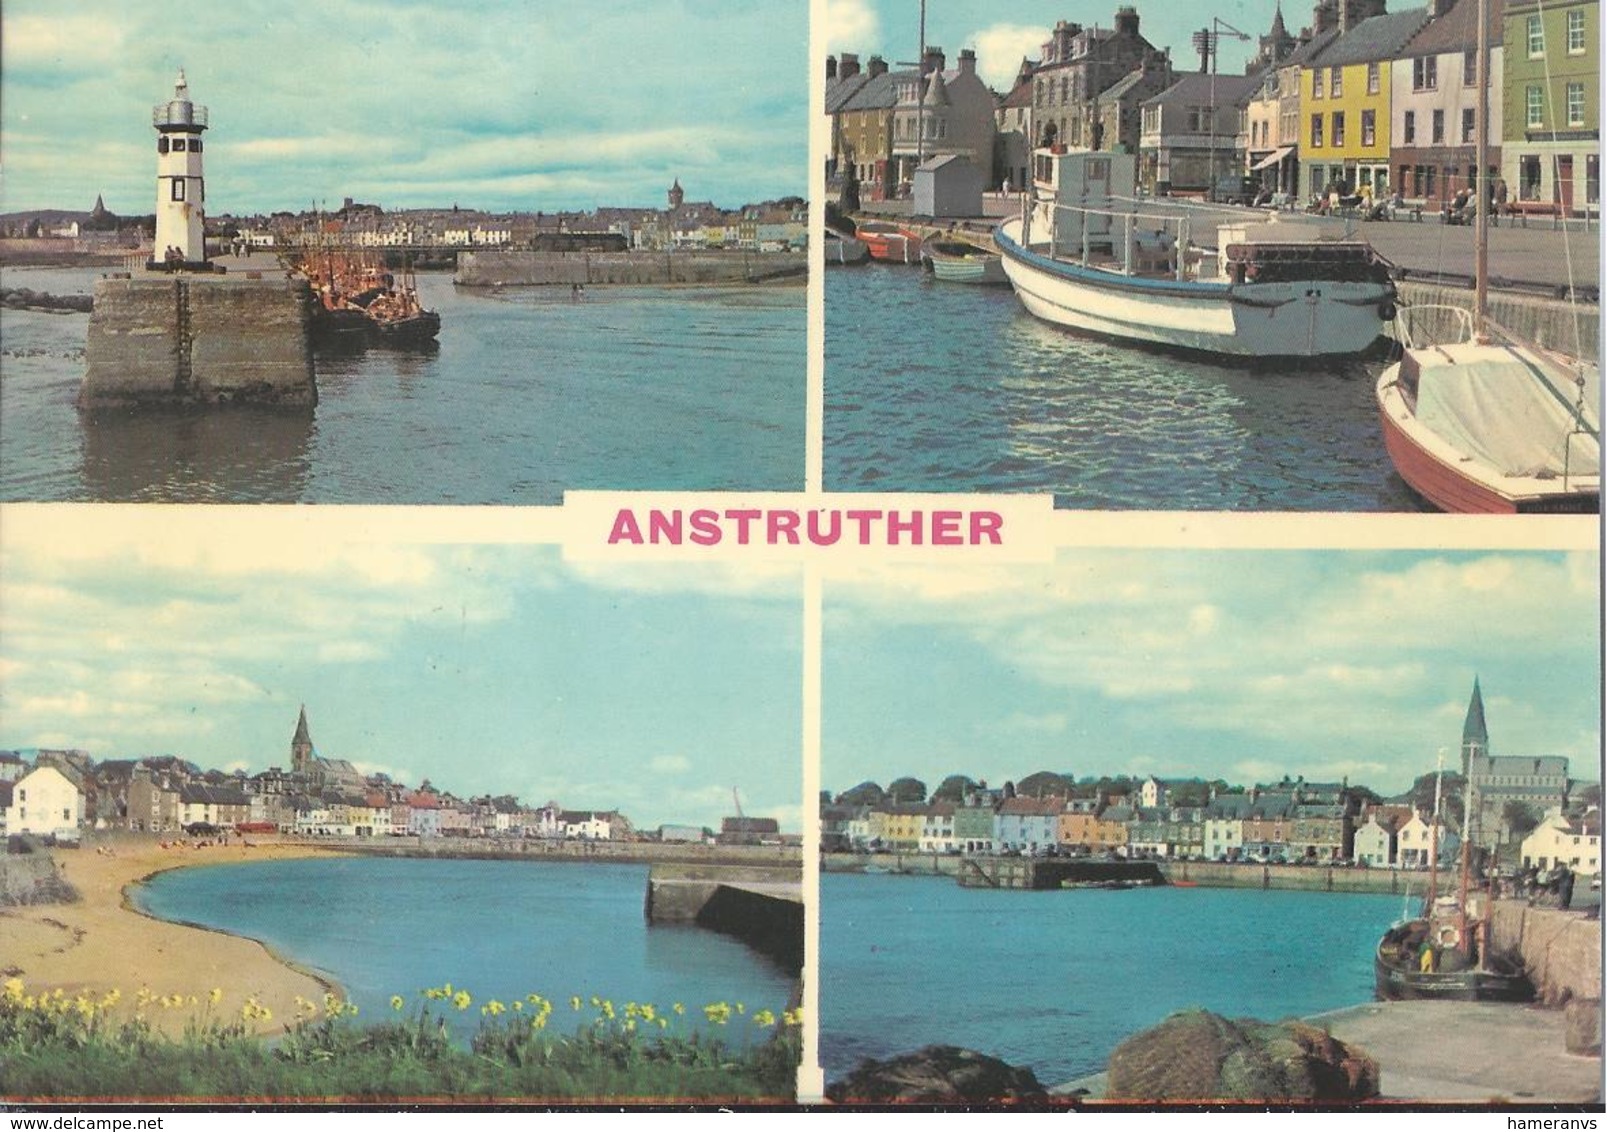 Anstruther - H4943 - Fife